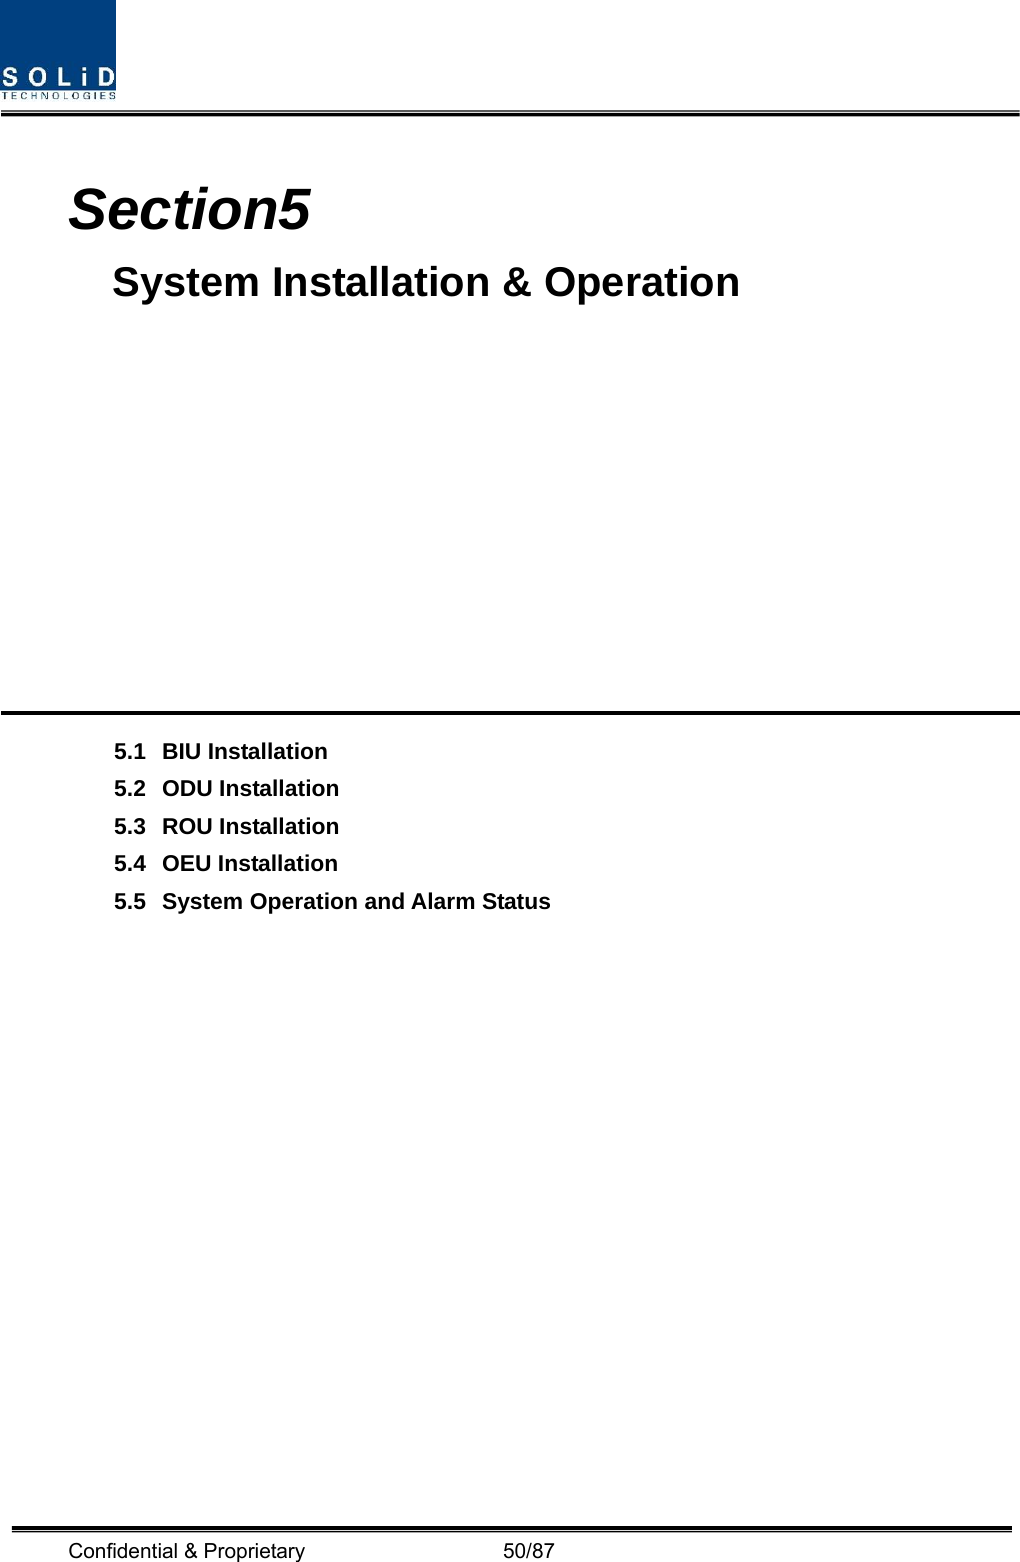  Confidential &amp; Proprietary                   50/87  Section5                                         System Installation &amp; Operation            5.1 BIU Installation 5.2 ODU Installation 5.3 ROU Installation 5.4 OEU Installation 5.5 System Operation and Alarm Status                